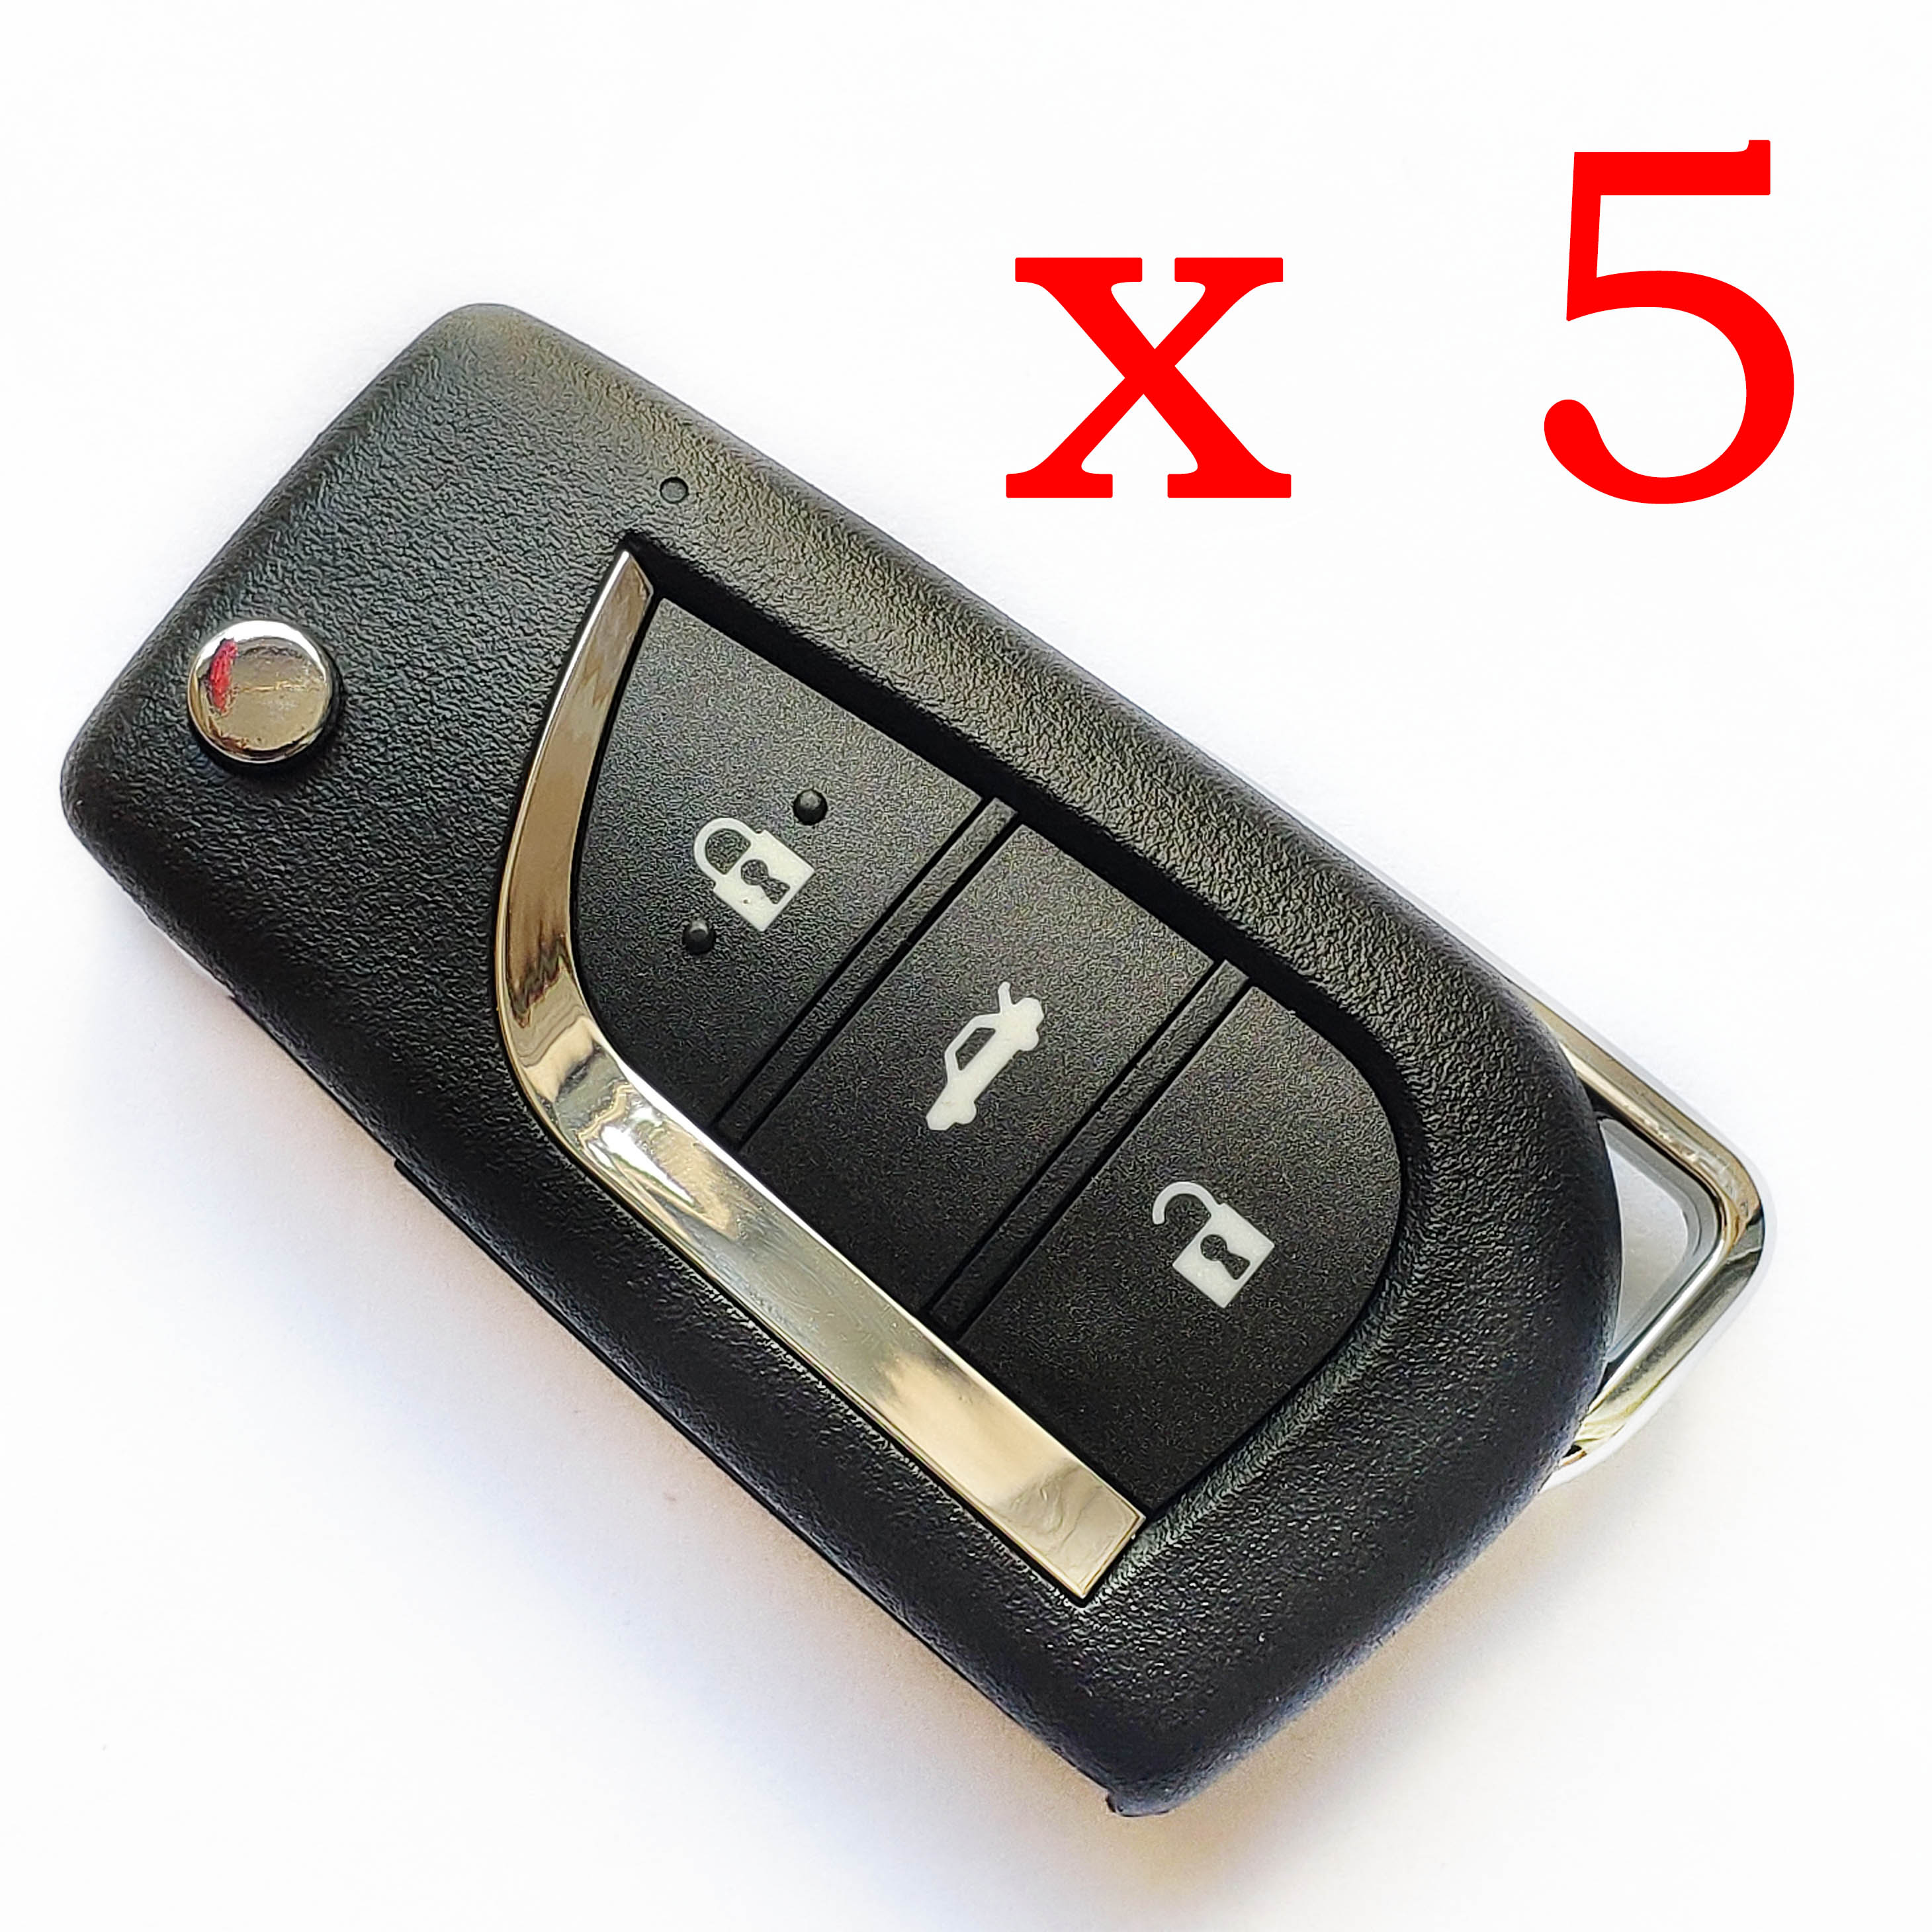 5 pieces Xhorse VVDI Toyota Type Universal Remote Control 3 Buttons - XKTO00EN - with Blades & Logos 